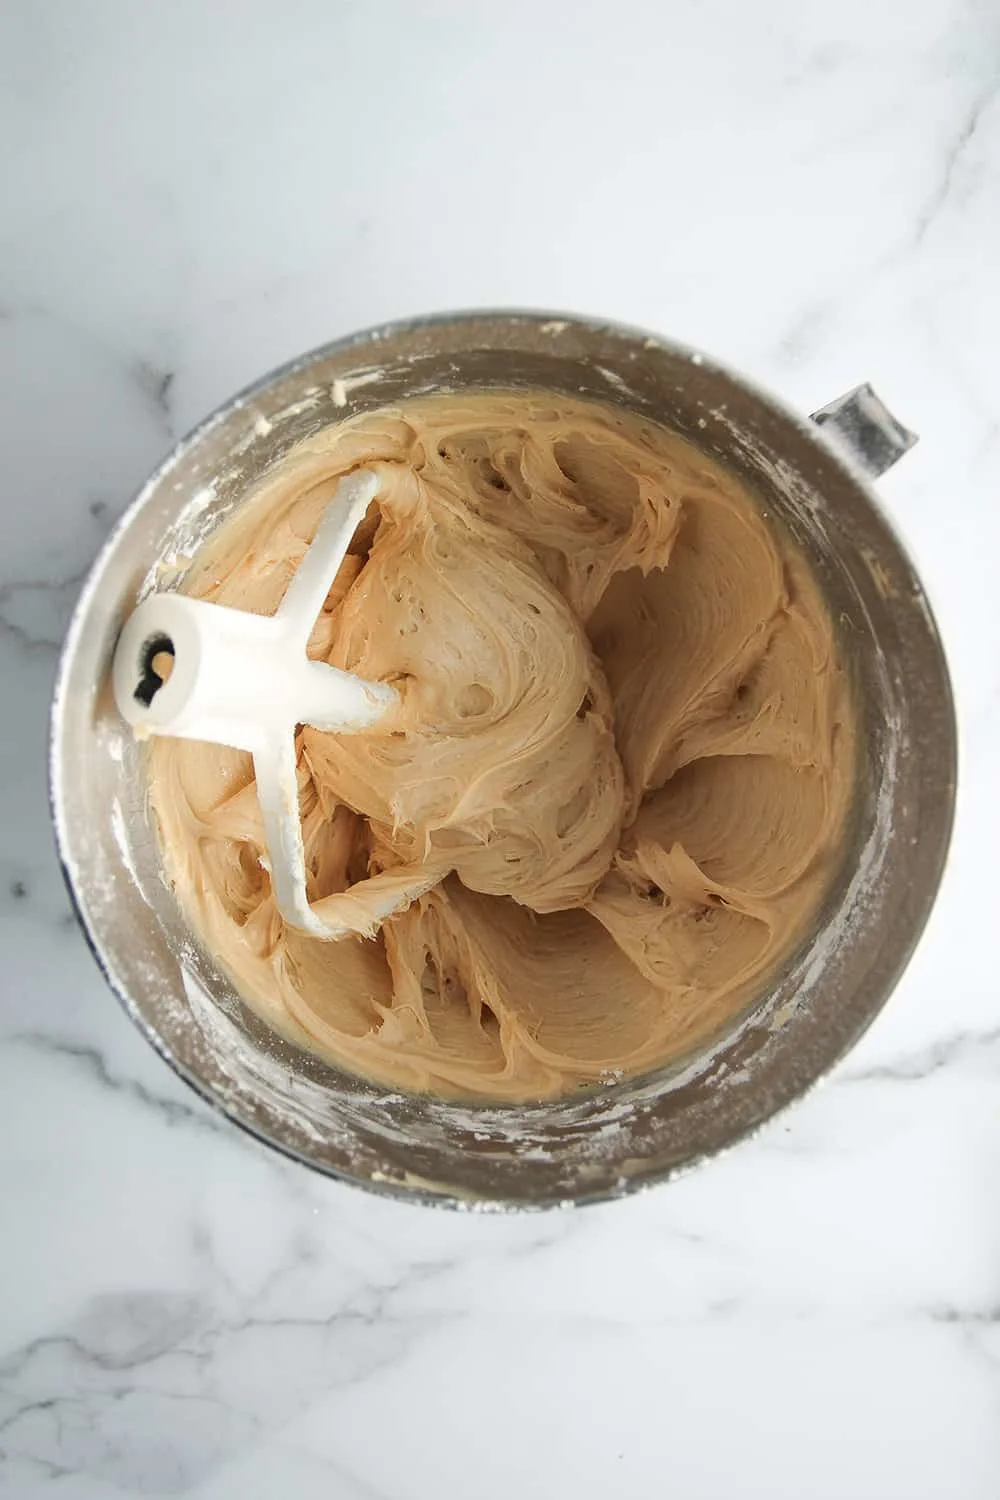 Peanut butter cream cheese frosting is a delicious addition to Peanut Butter Cake